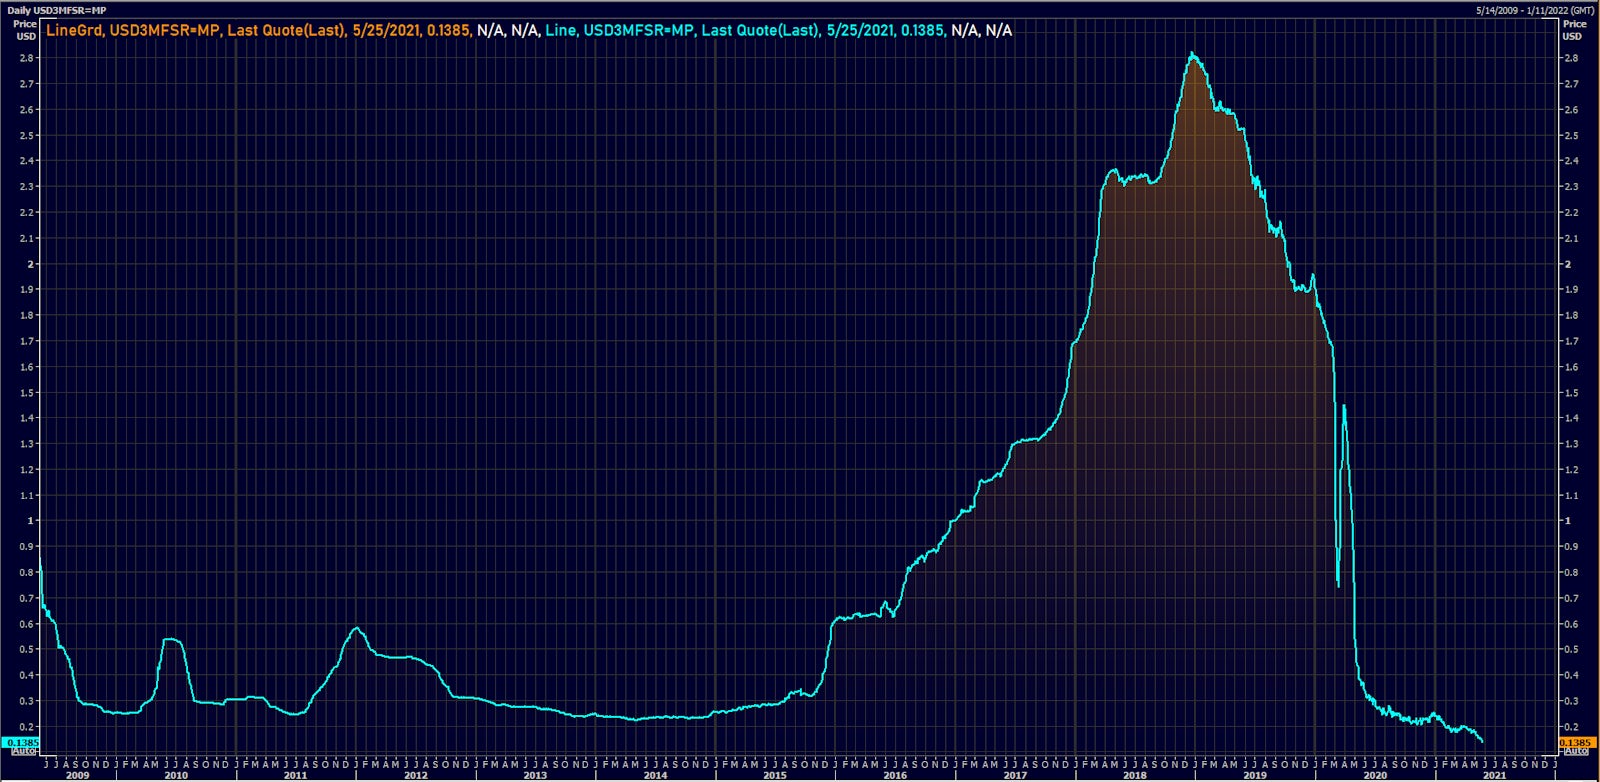 3-Month USD Libor At Lowest Level Ever | Source: Refinitiv